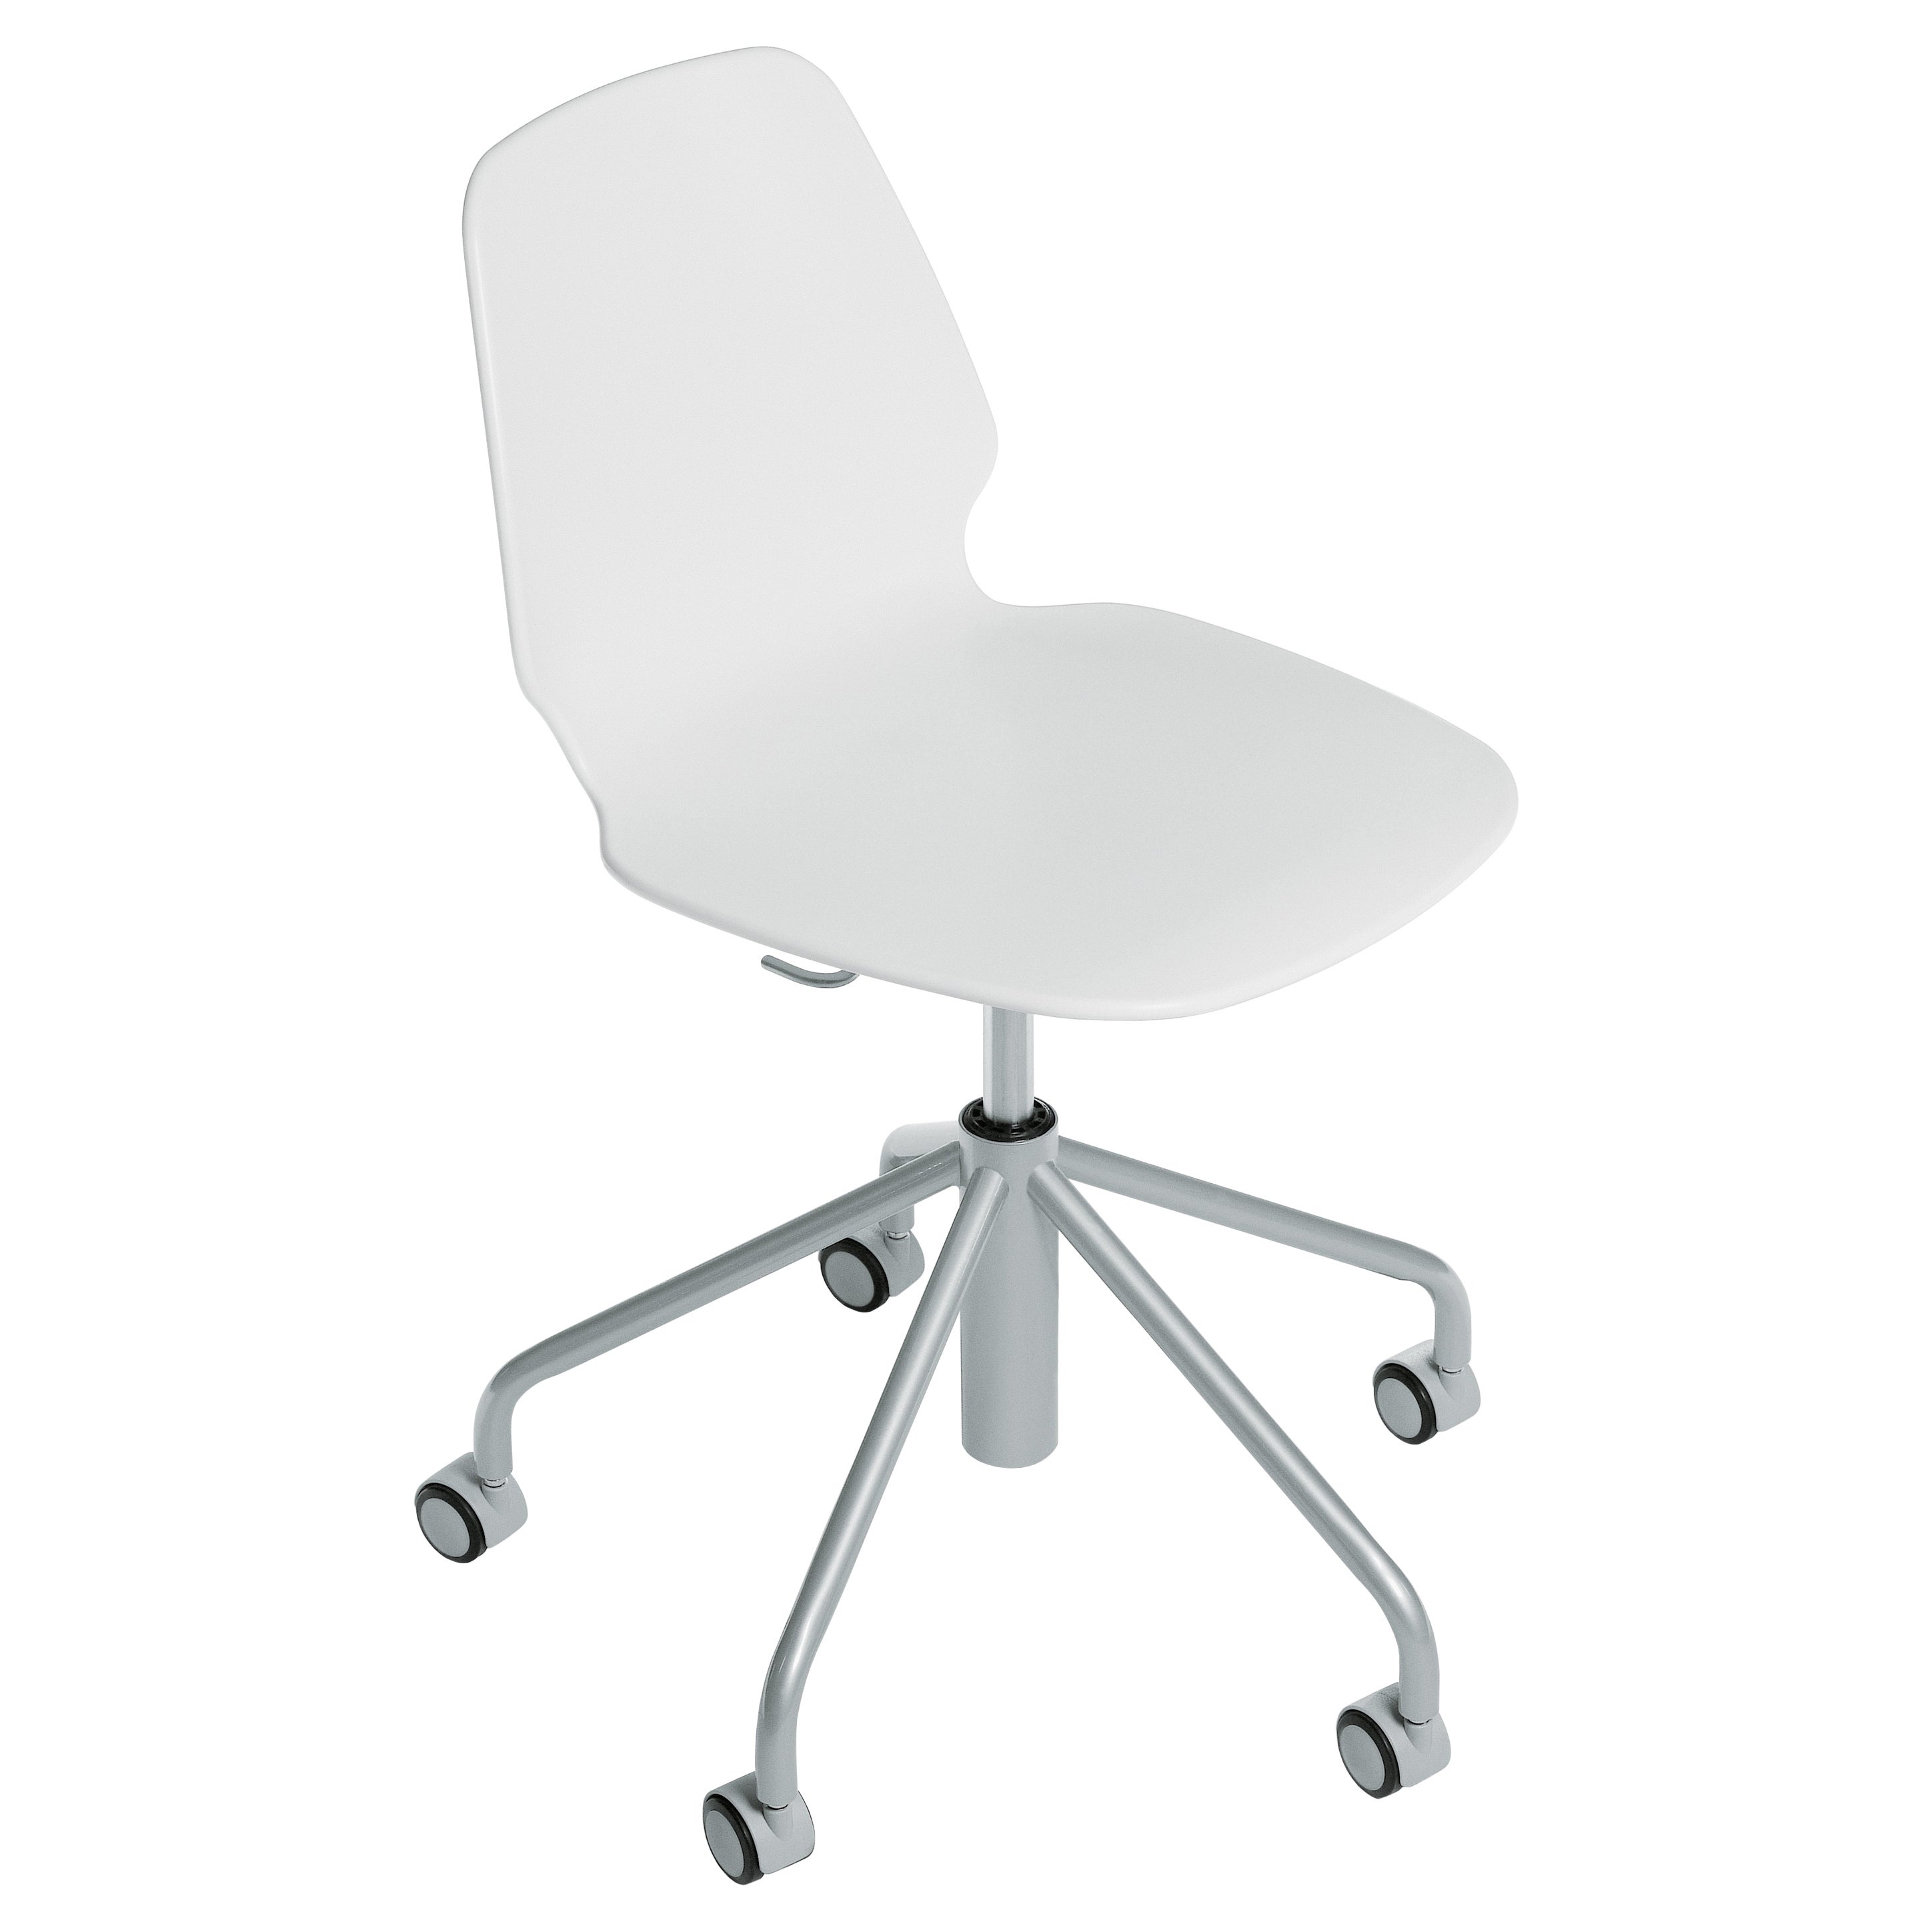 Alias 538 Selinunte Studio Chair in White Seat and Light Grey Steel Frame For Sale